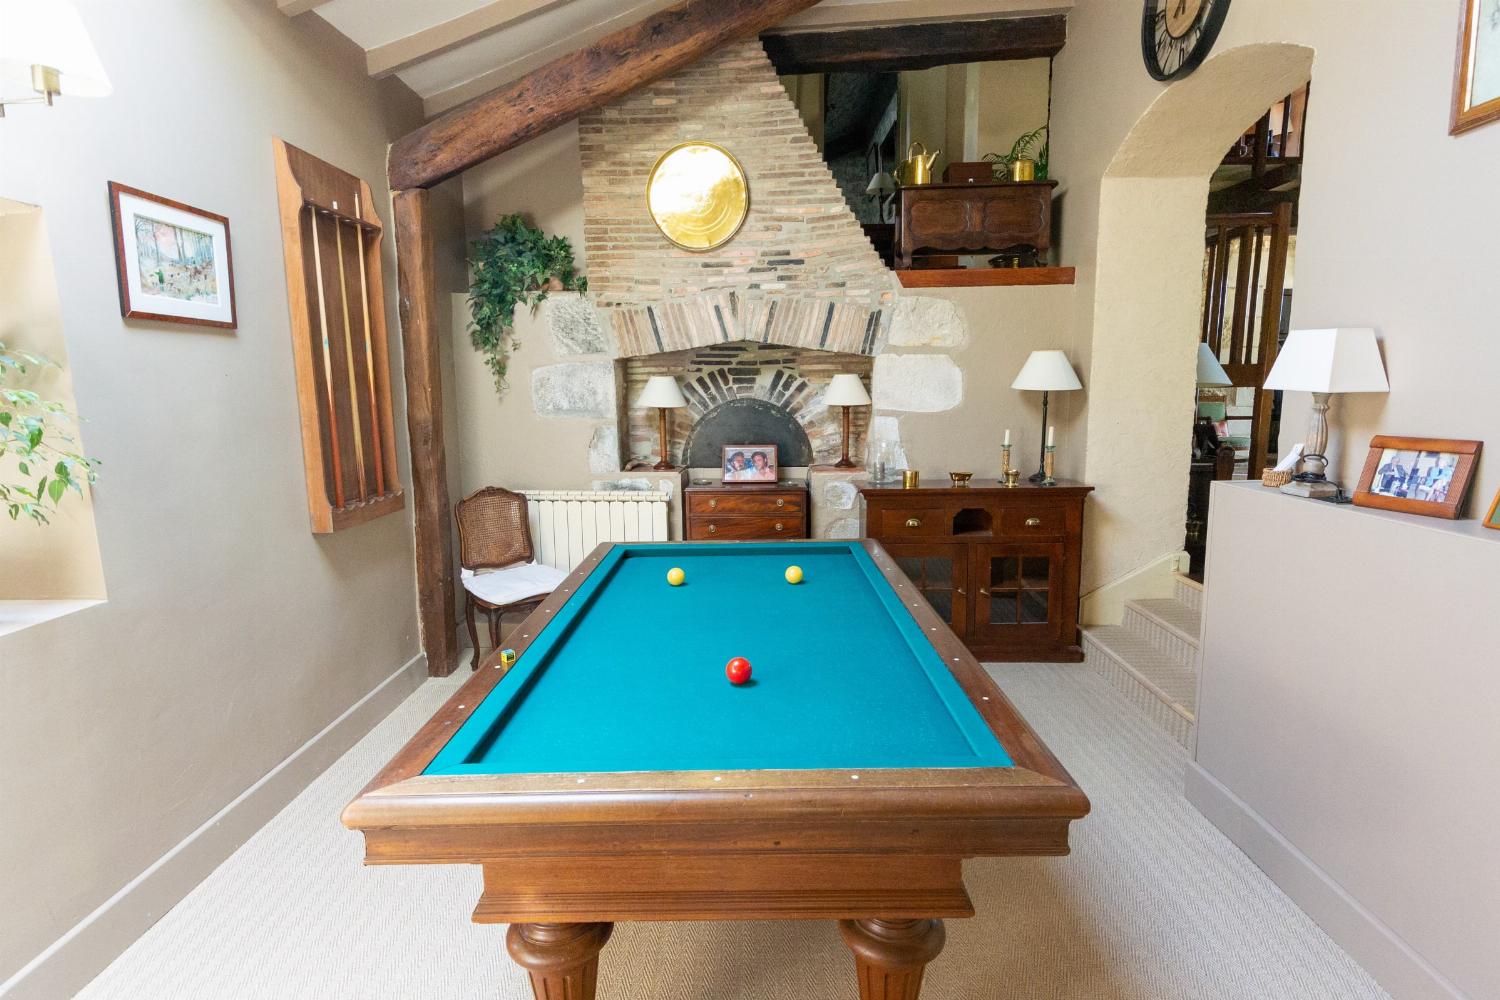 Pool table |Holiday home in Loire